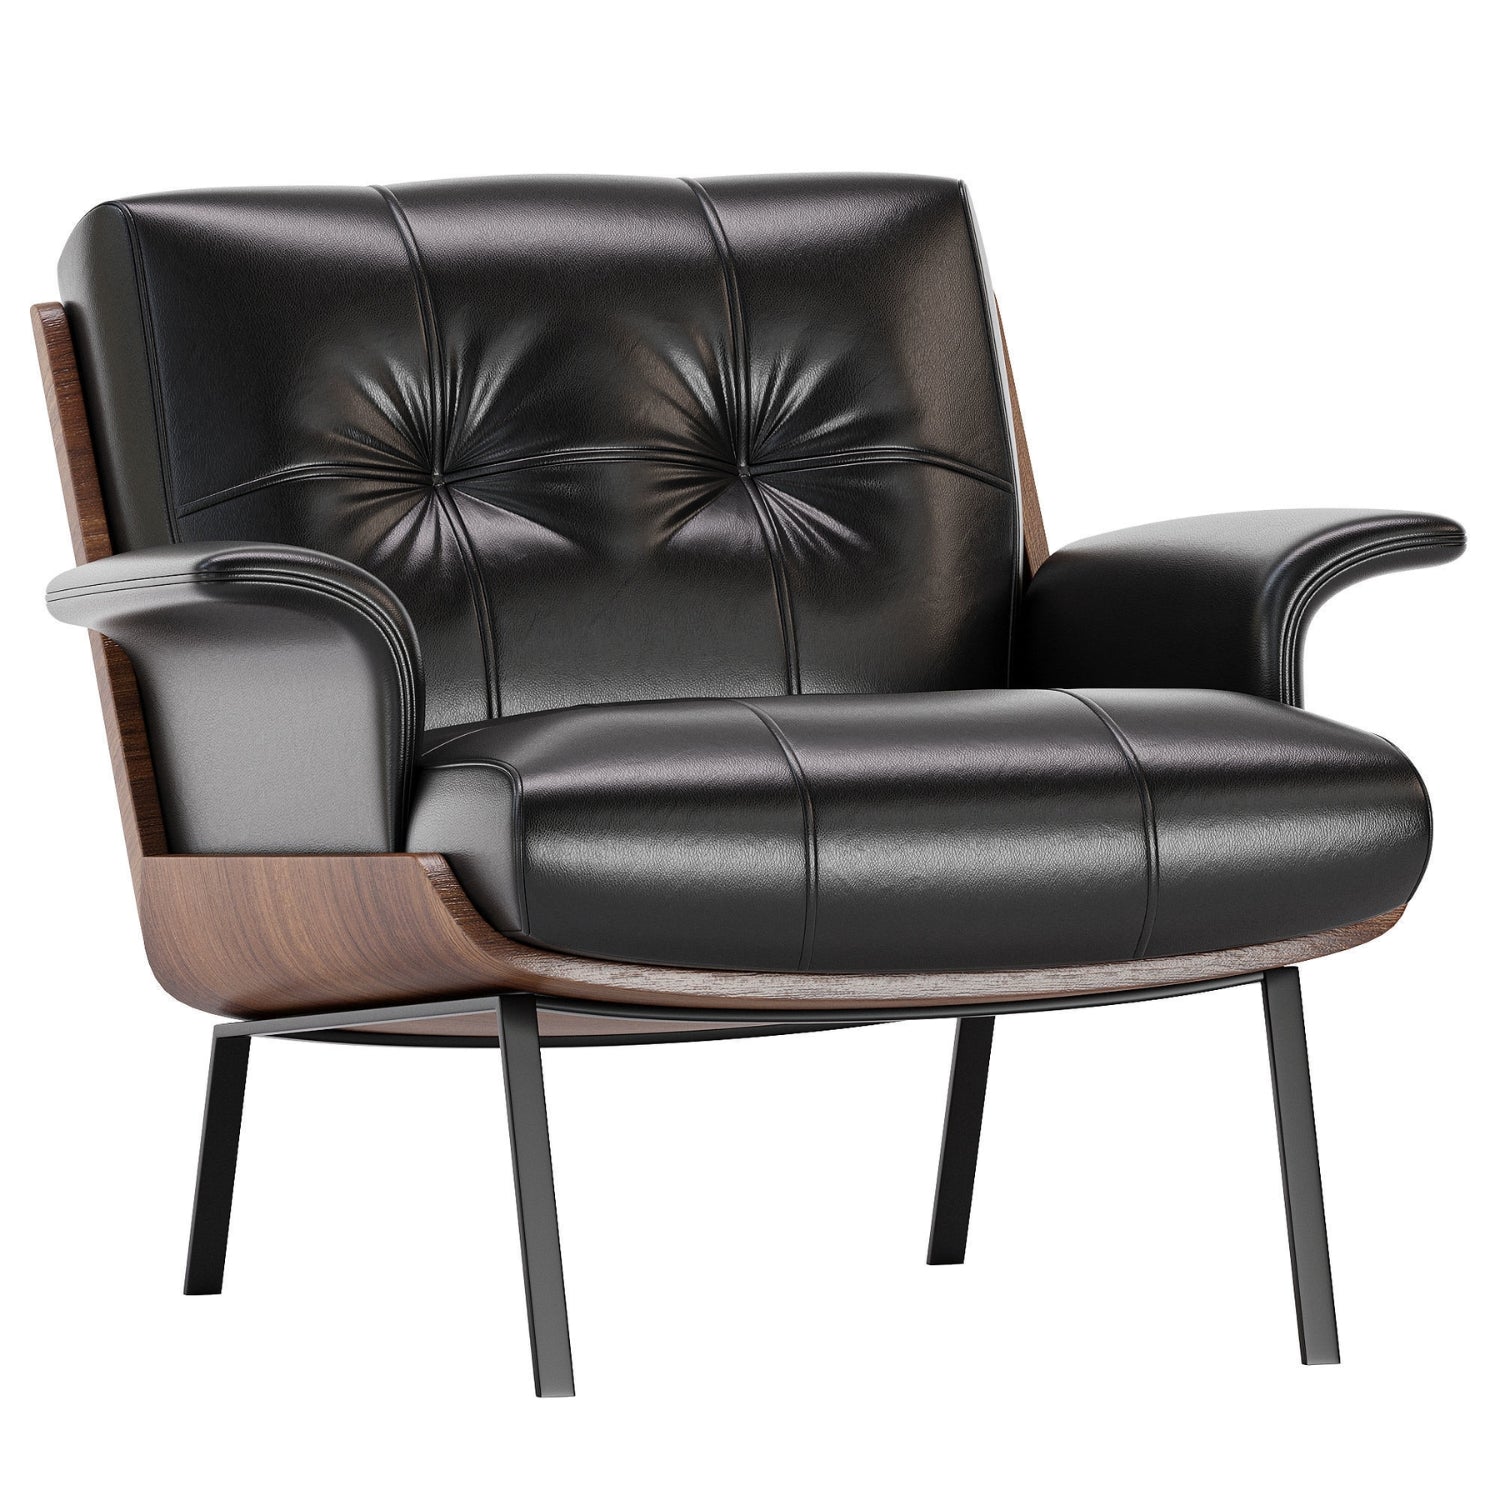 Replica Daiki sleek black leather lounge armchair in white curtained room.